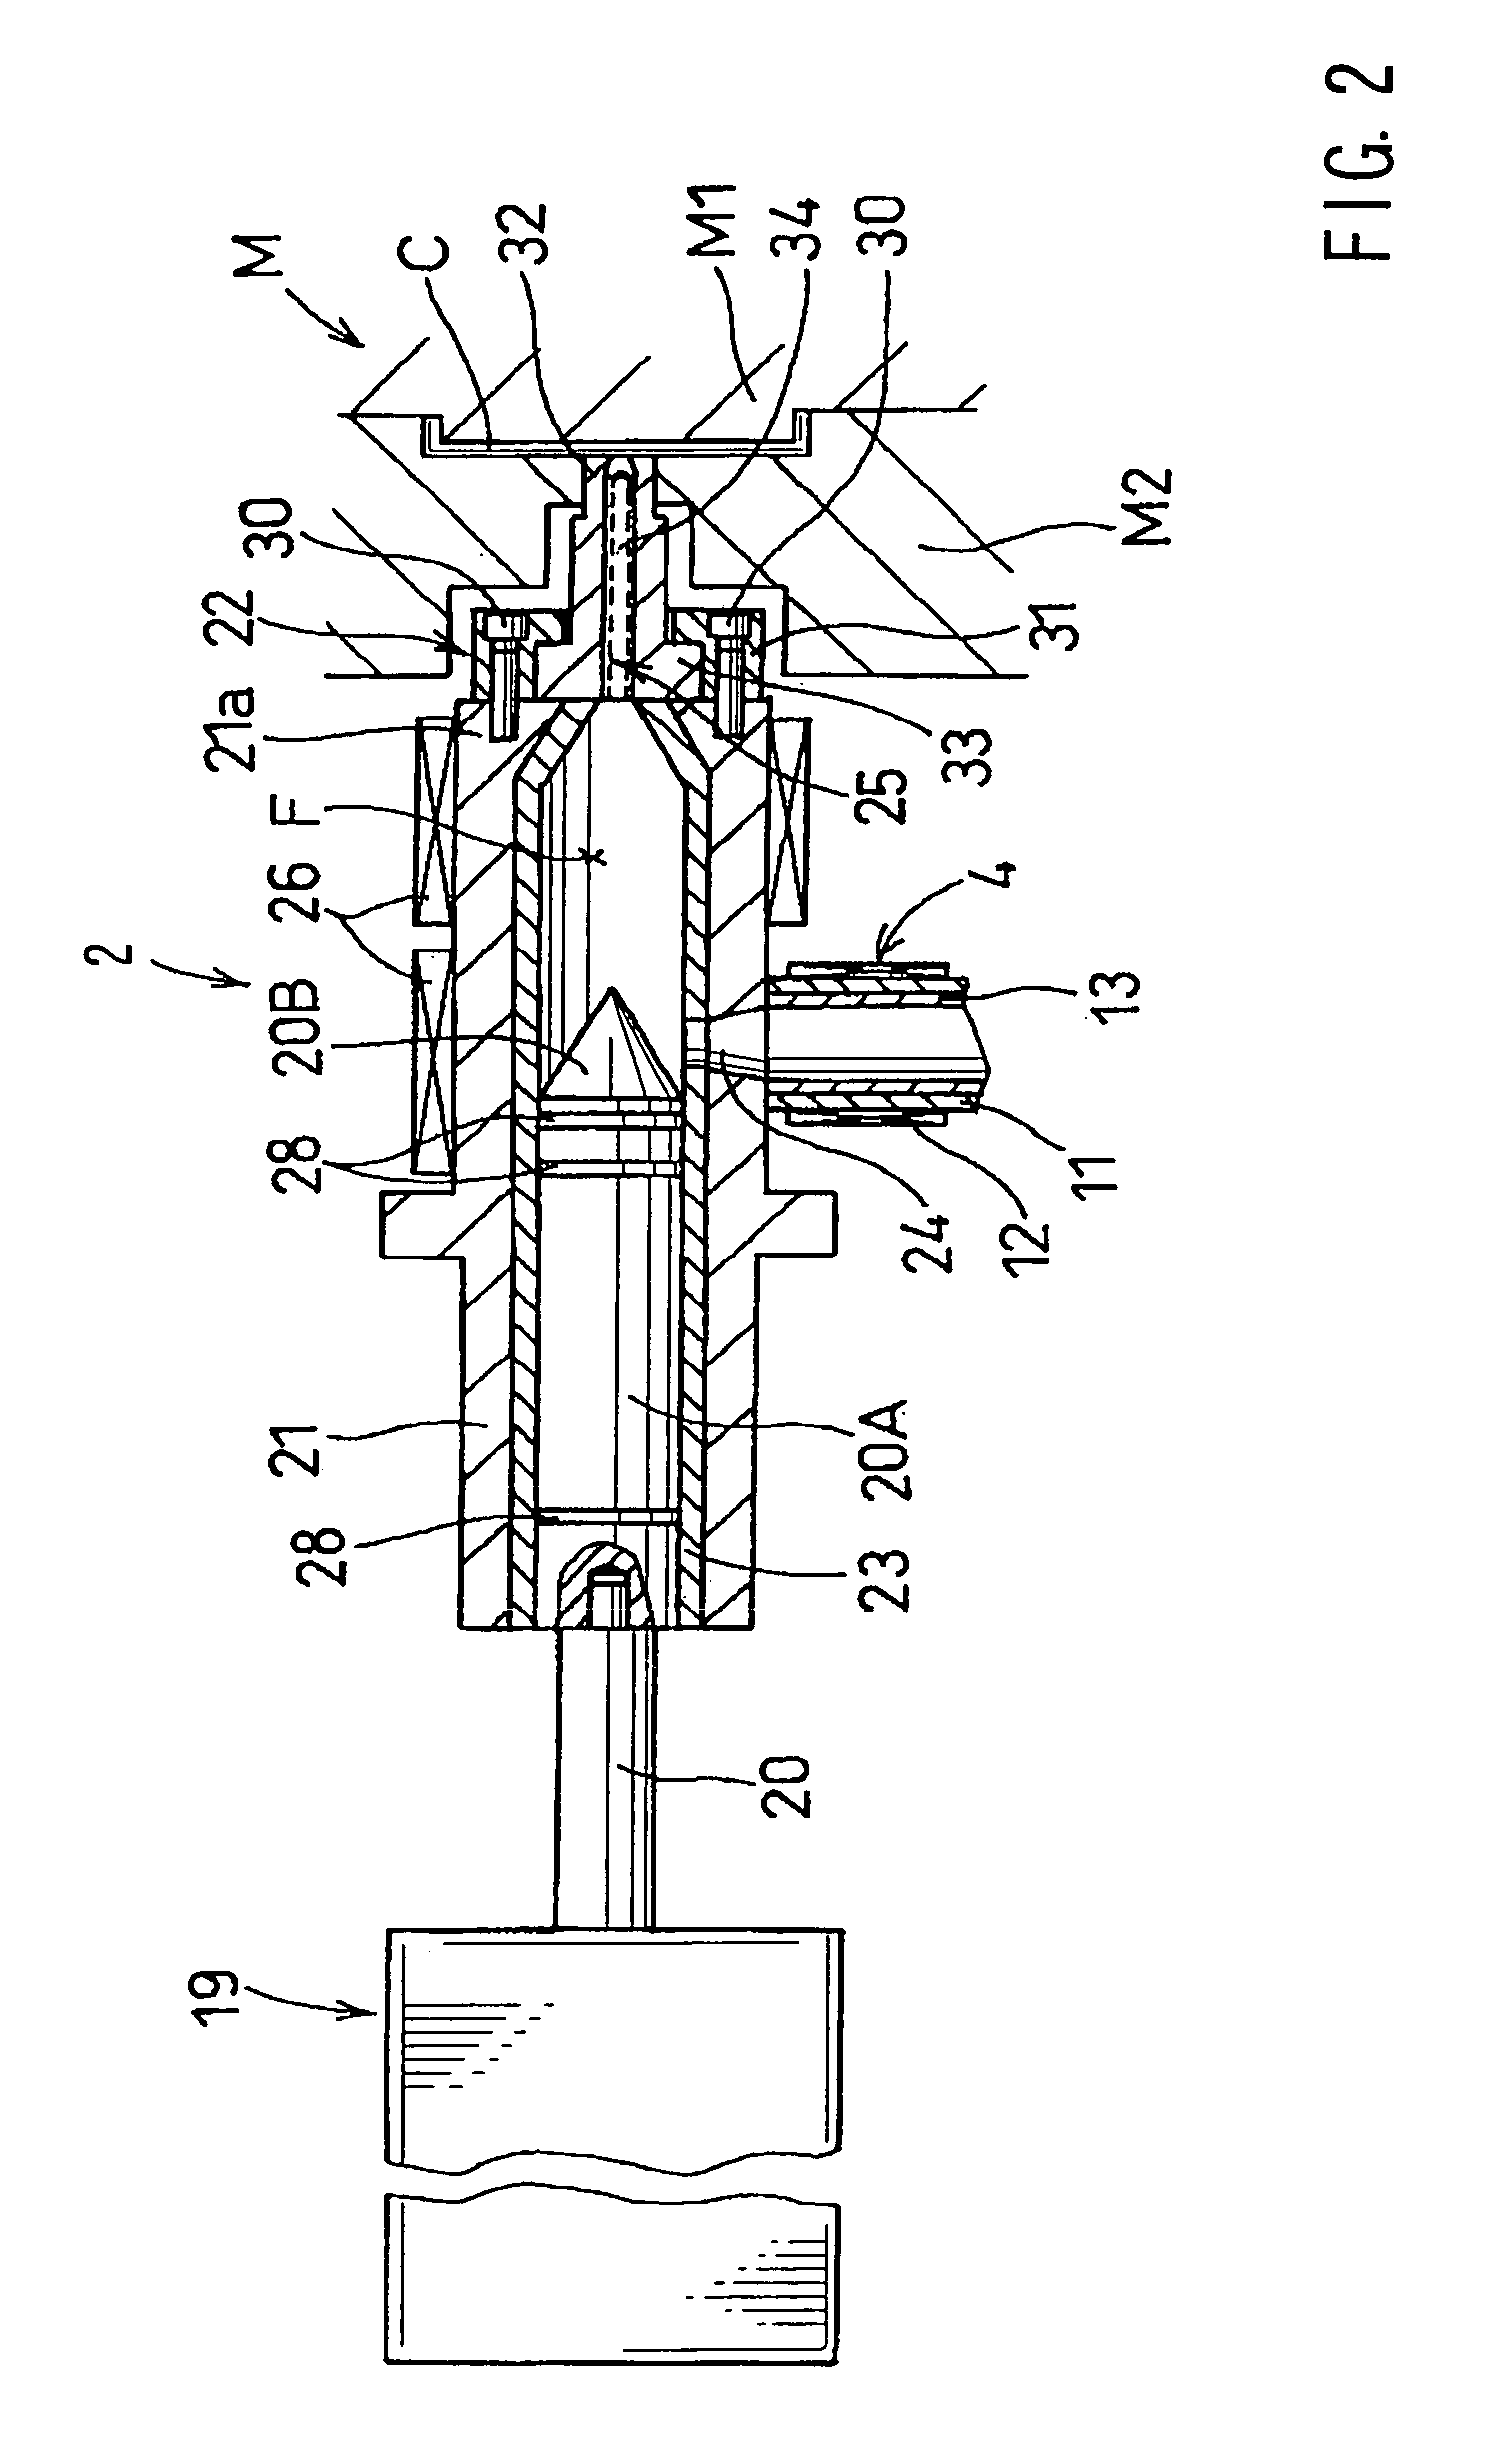 Devices and methods for melting materials